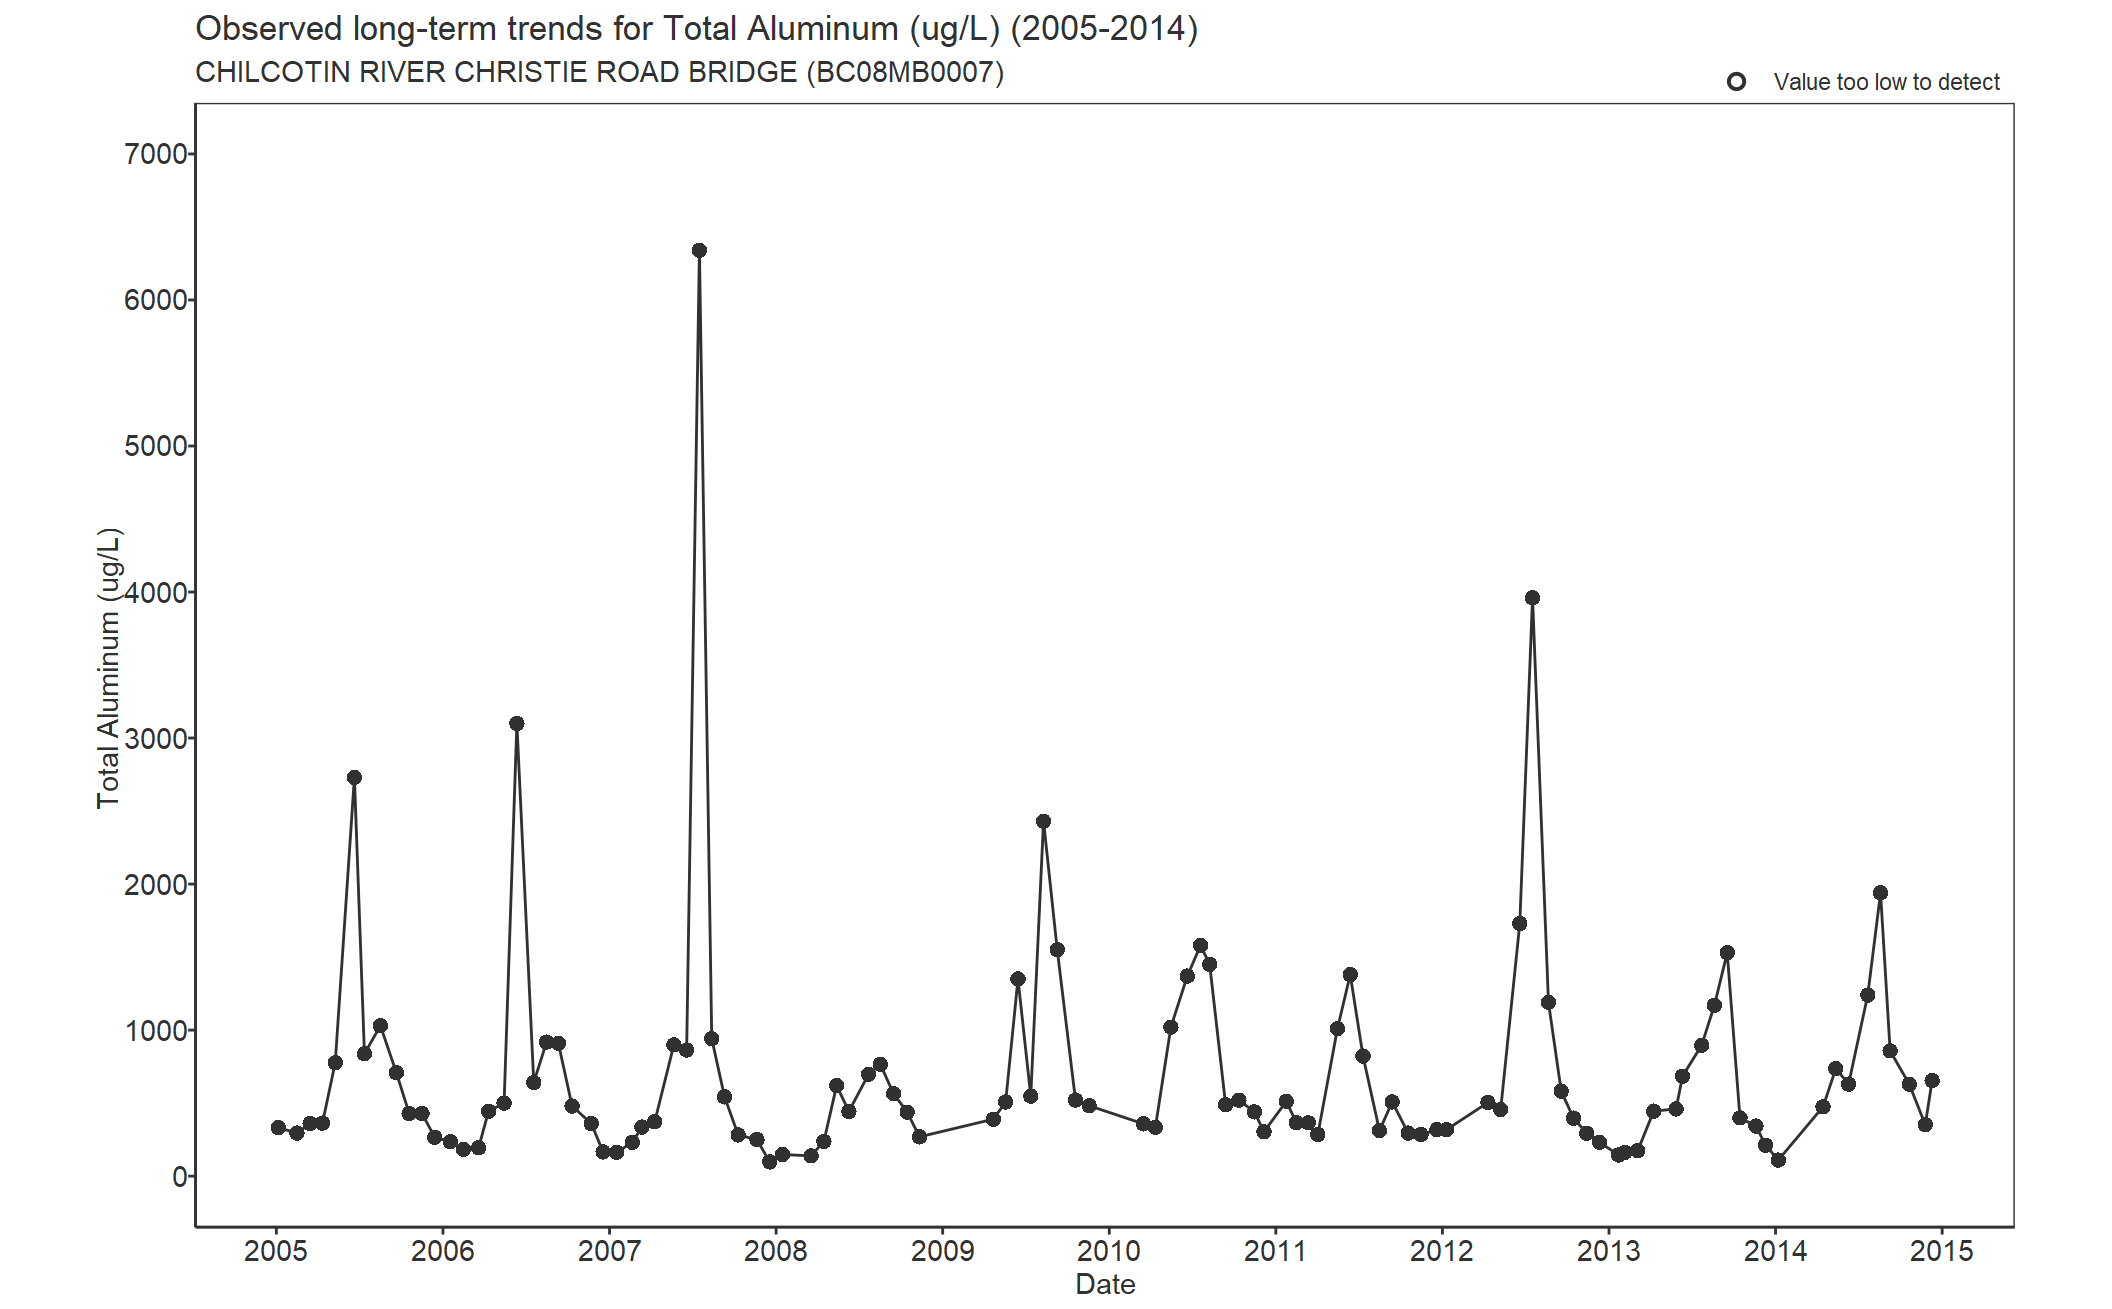 Observed long-term trends for Aluminum Total (2005-2014)